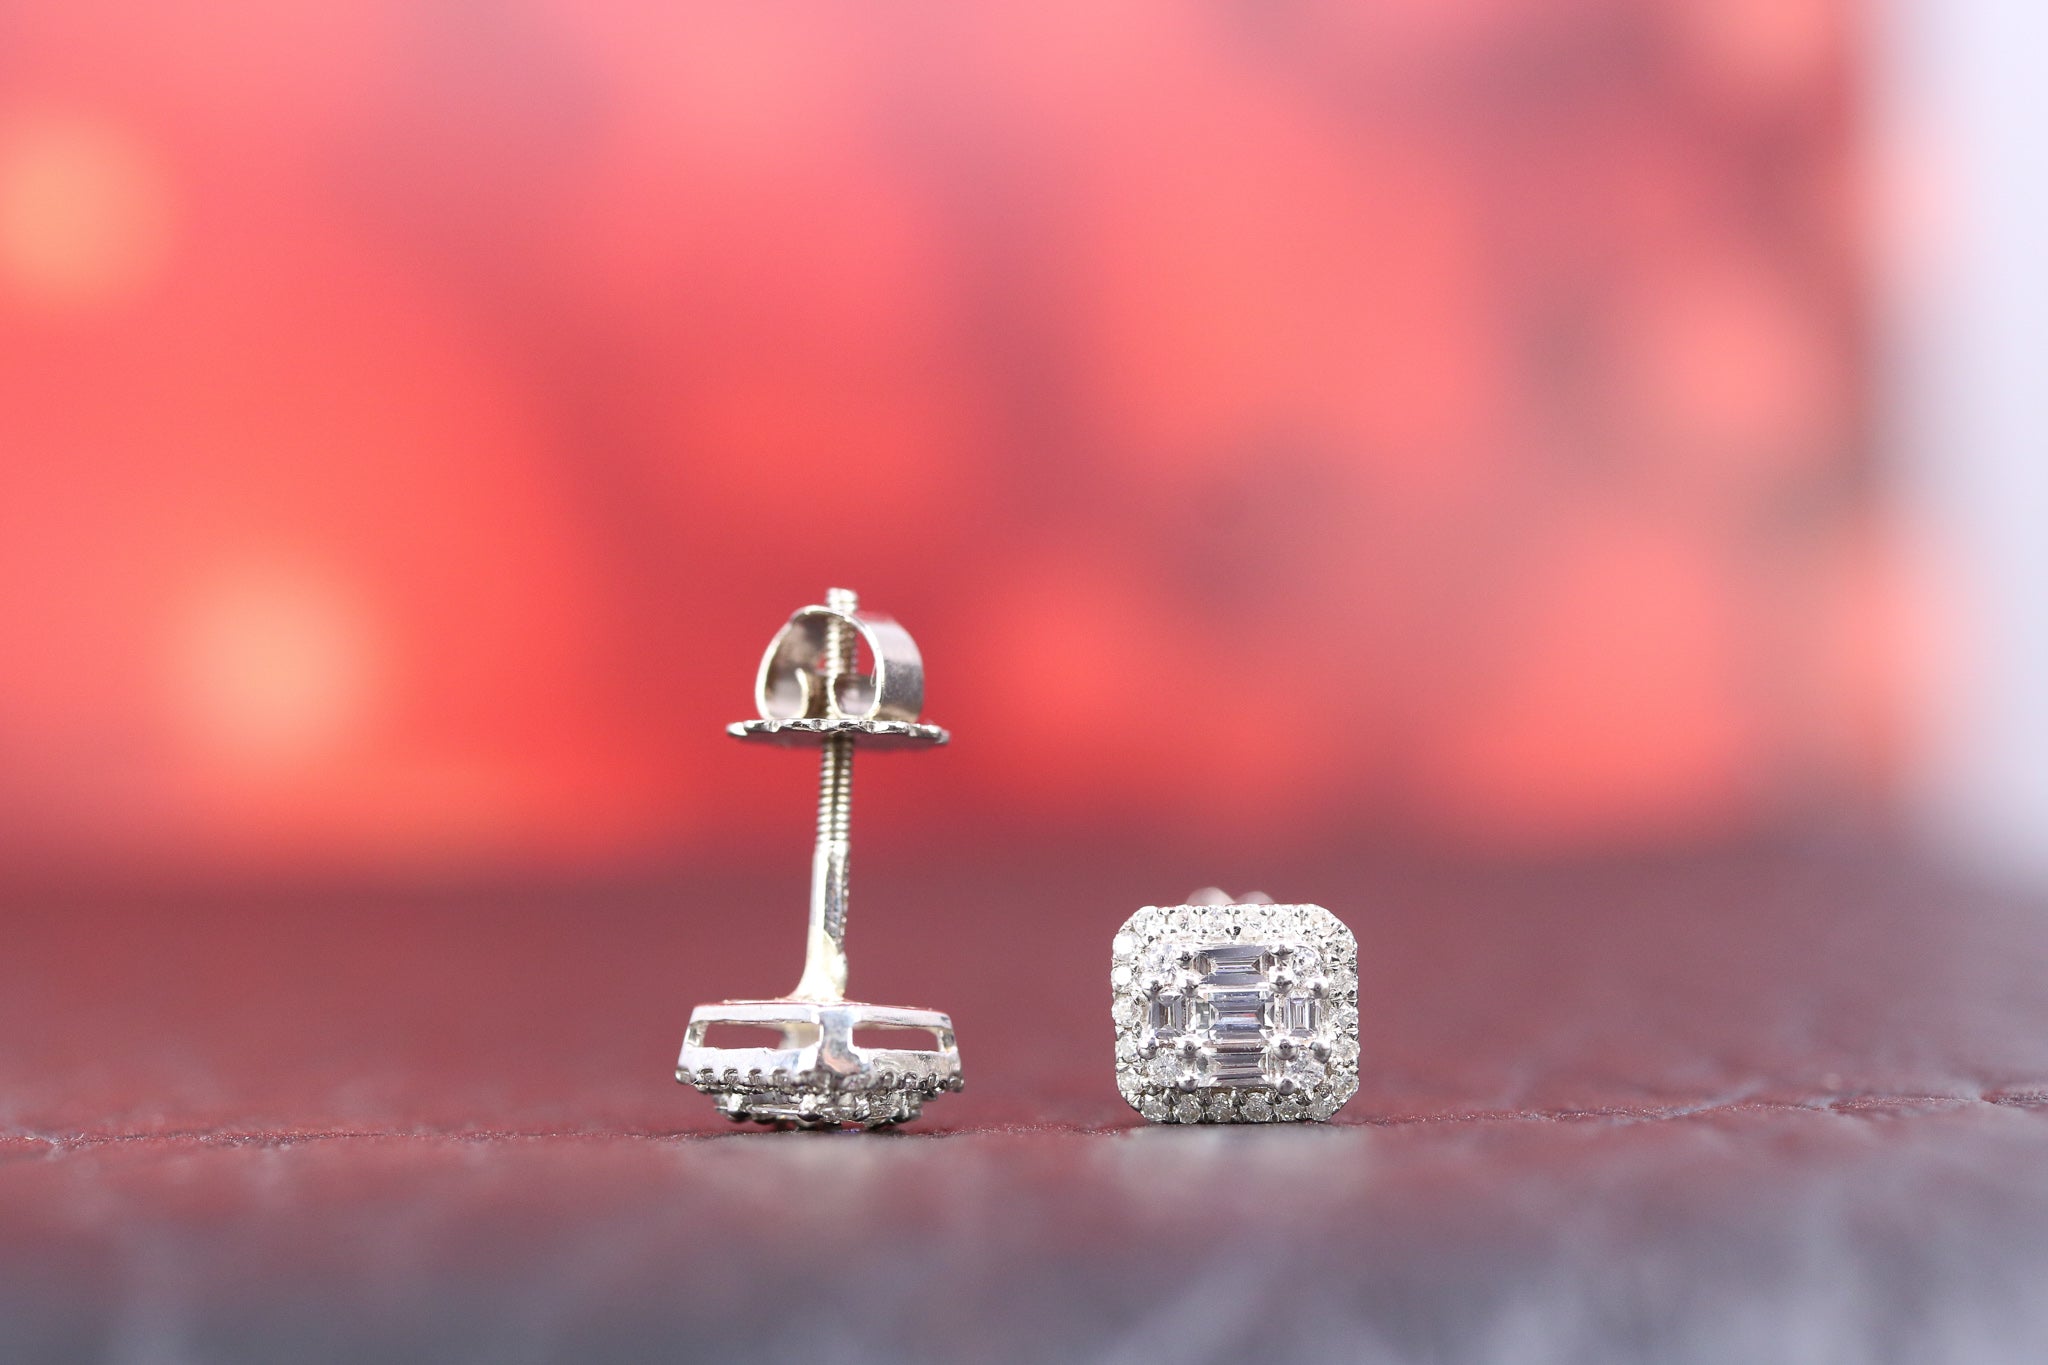 18ct White Gold & Diamond Earrings - HJ2666 - Hallmark Jewellers Formby & The Jewellers Bench Widnes